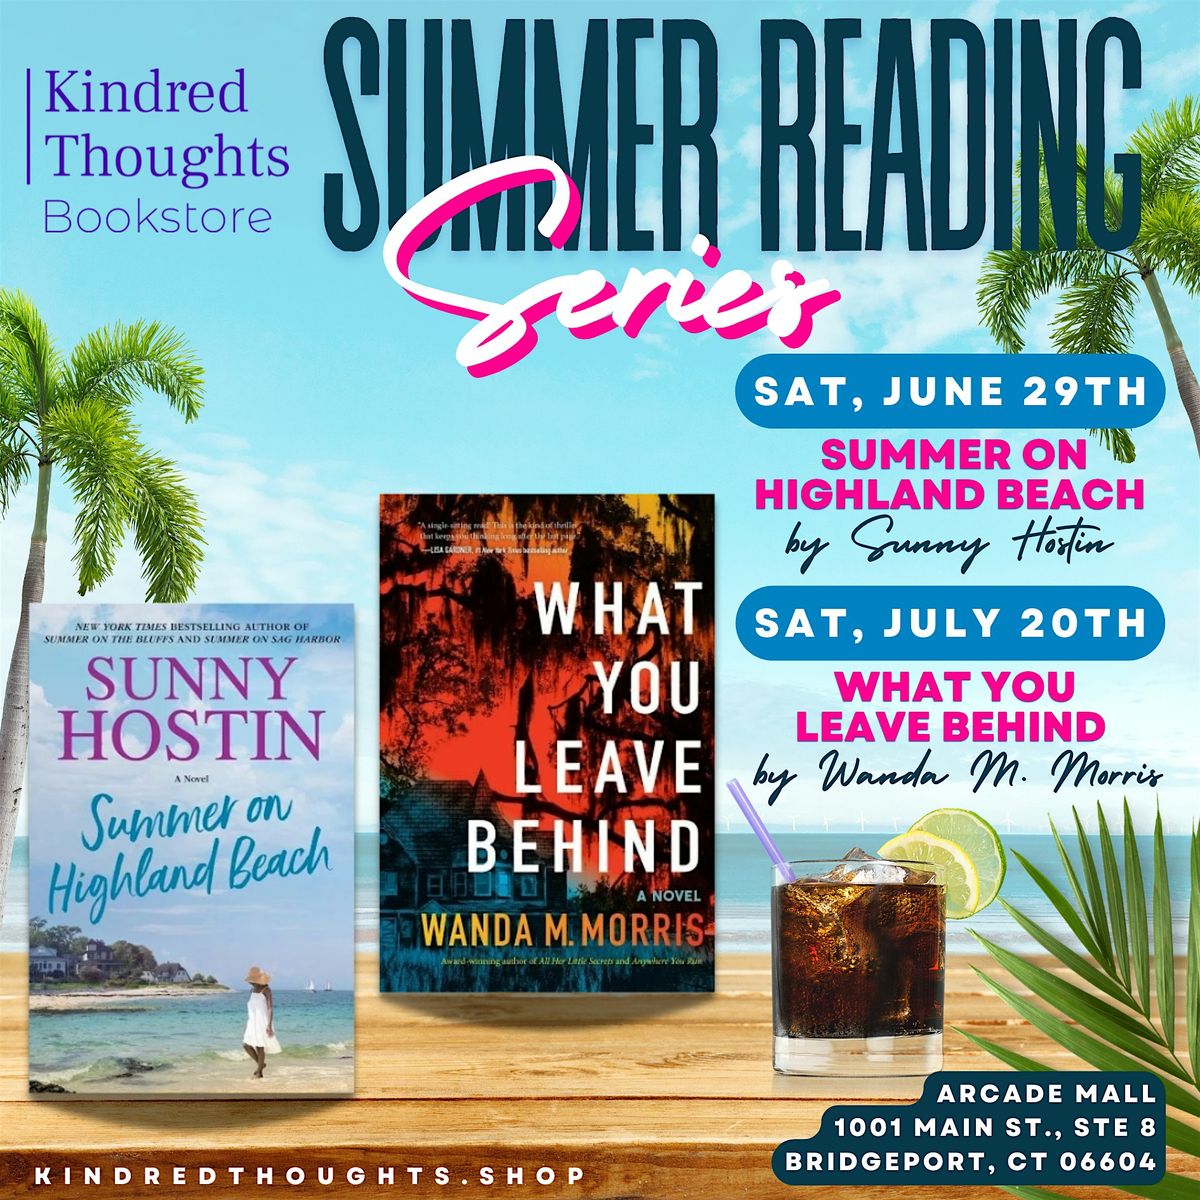 Summer Reading Series: What You Leave Behind